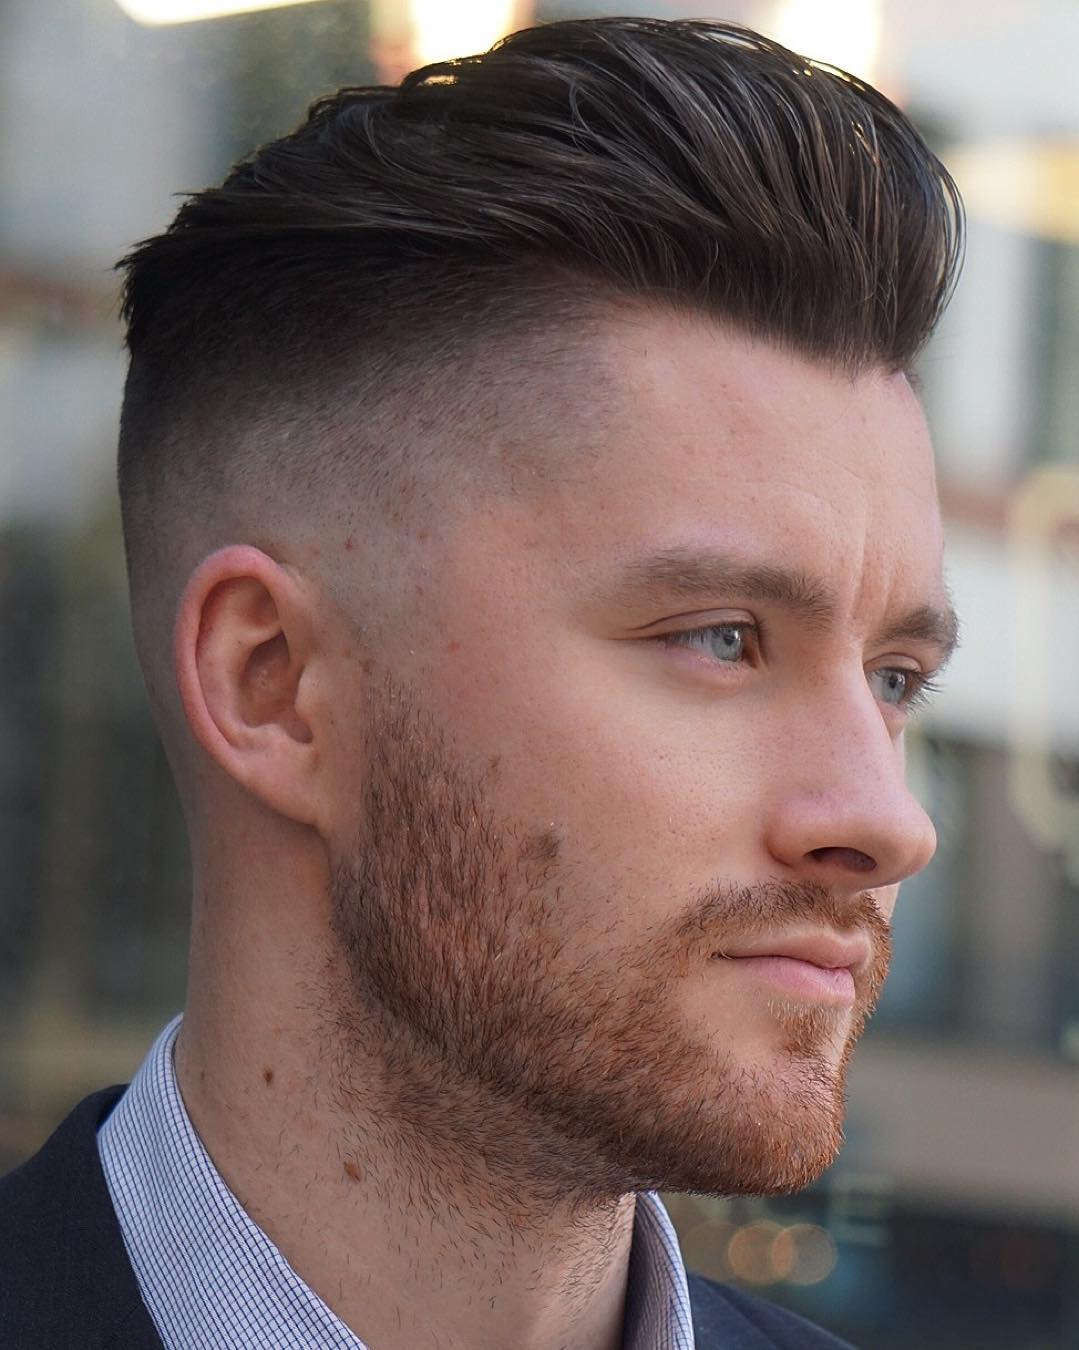 Faded Undercut Hairstyle
 50 Stylish Undercut Hairstyle Variations to copy in 2019